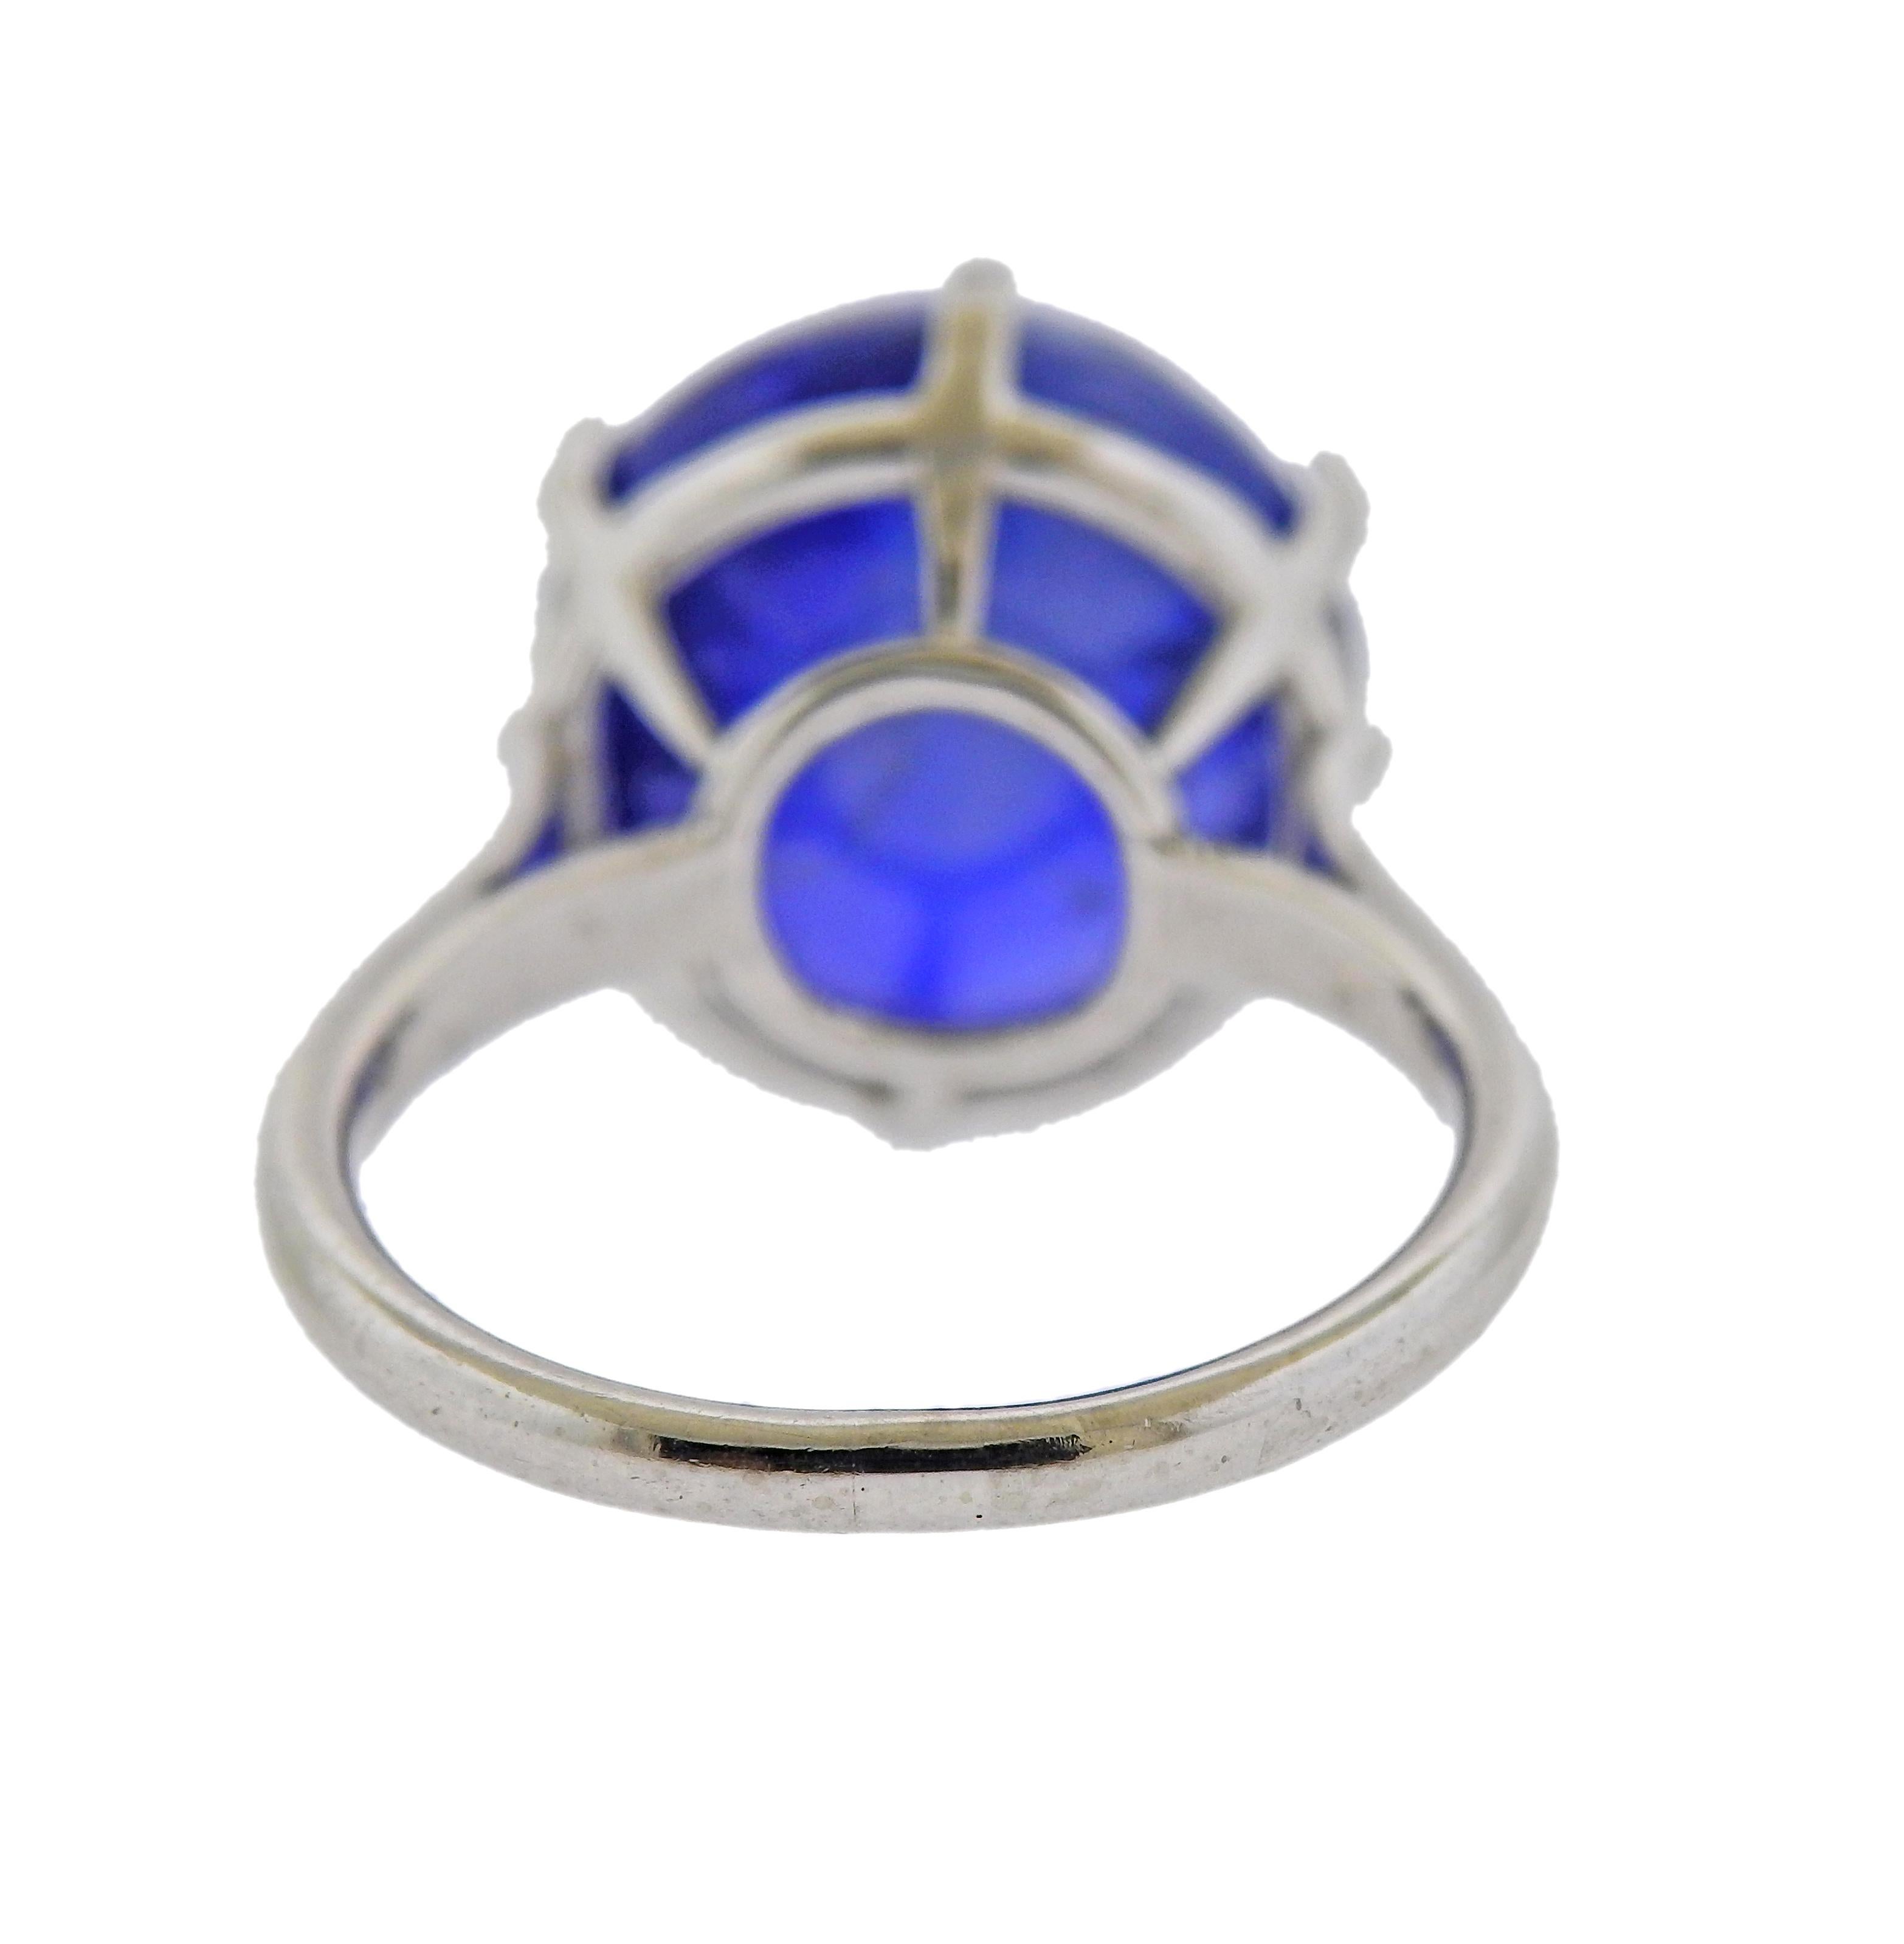 15.65 Carat No Heat Burma Sapphire Cabochon Gold Ring In Excellent Condition For Sale In New York, NY